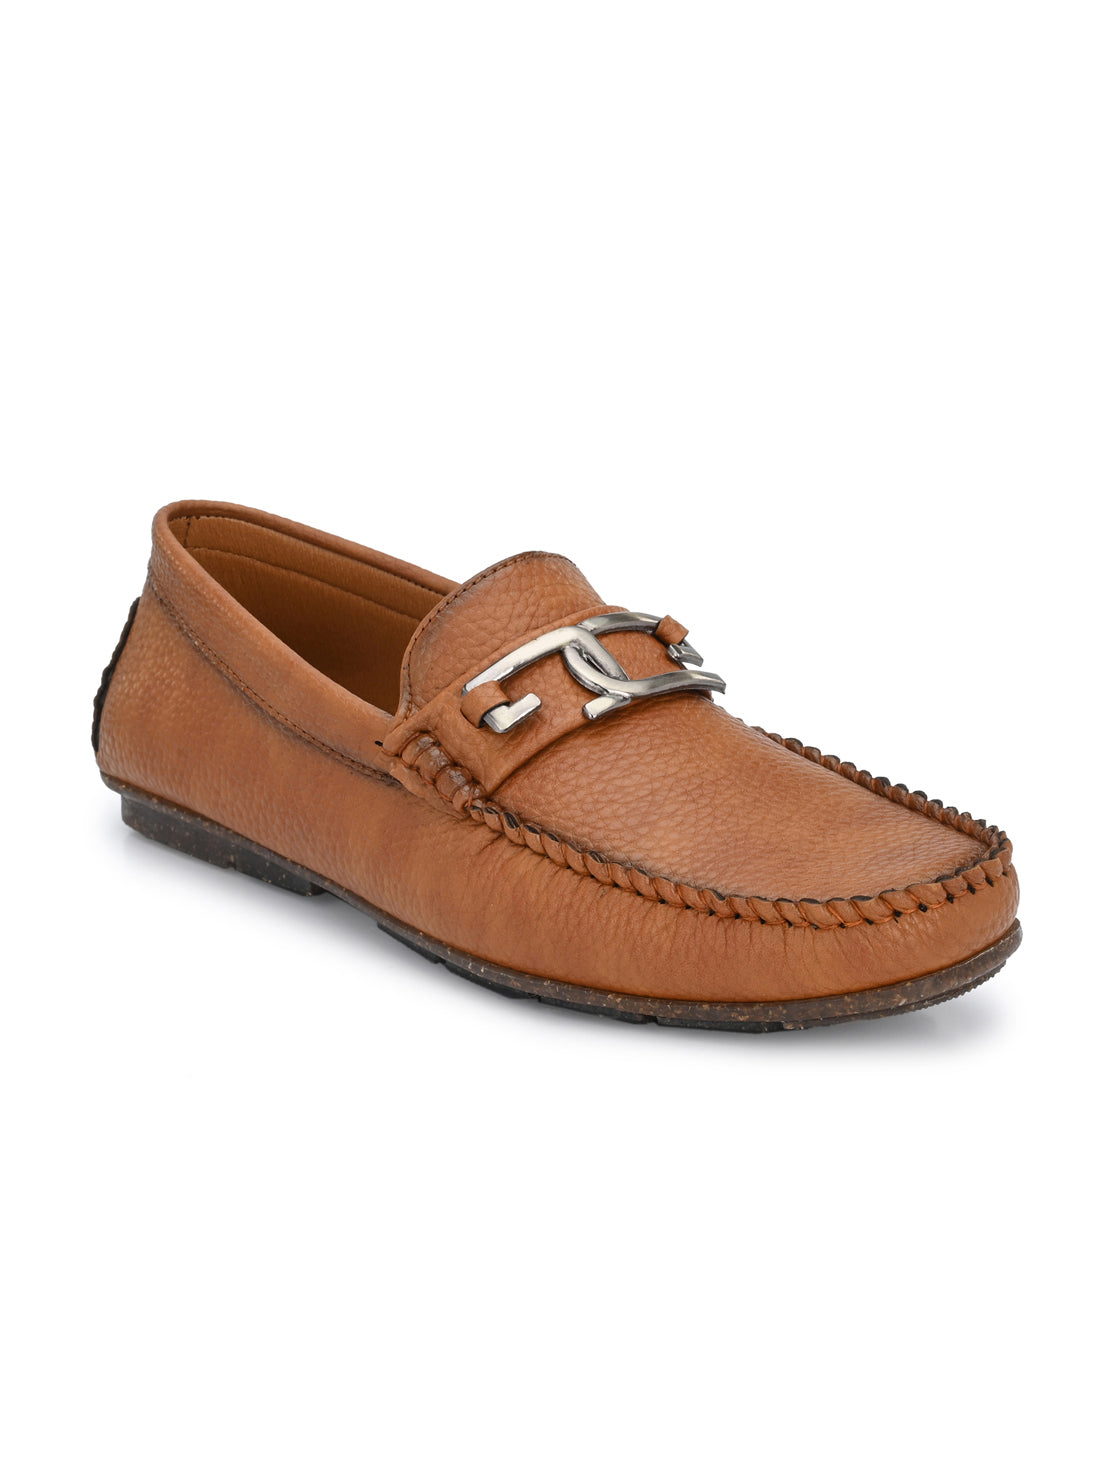 Guava Men's Tan Casual Slip On Driving Loafers (GV15JA768)